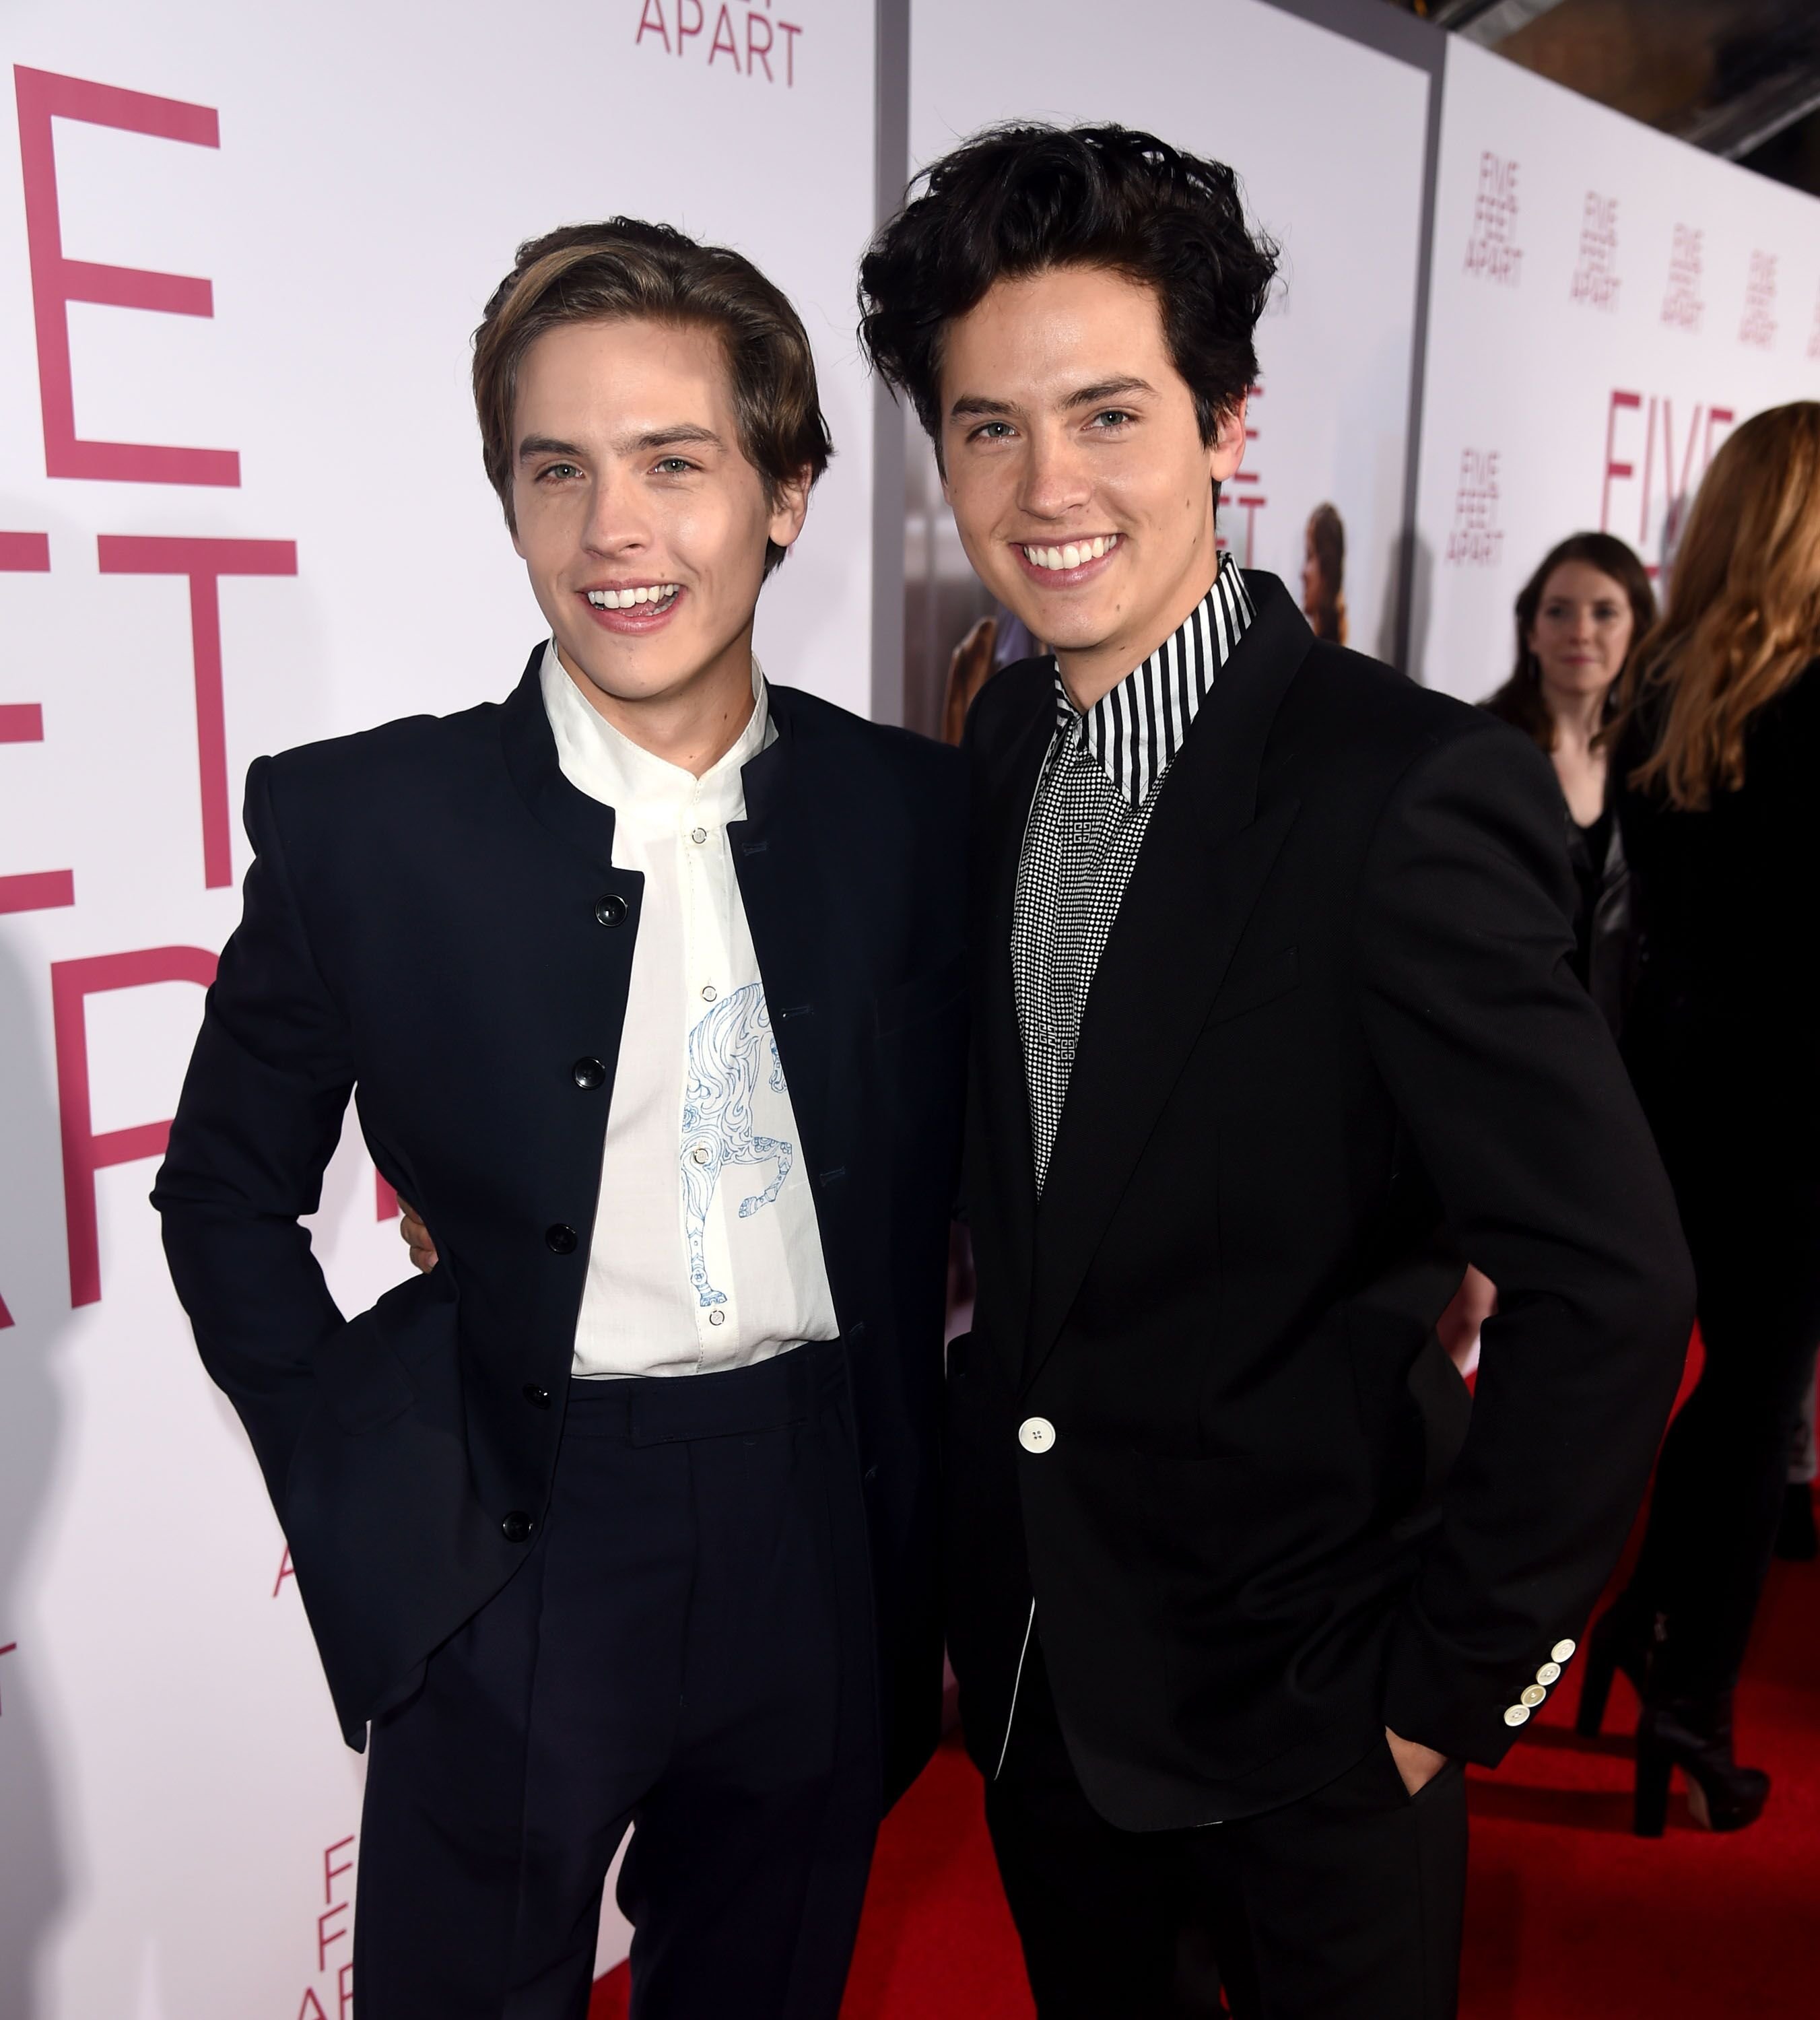 Dylan Sprouse (L) and Cole Sprouse arrive at the premiere of CBS Films' "Five Feet Apart" at the Fox Bruin Theatre. | Source: Getty Images